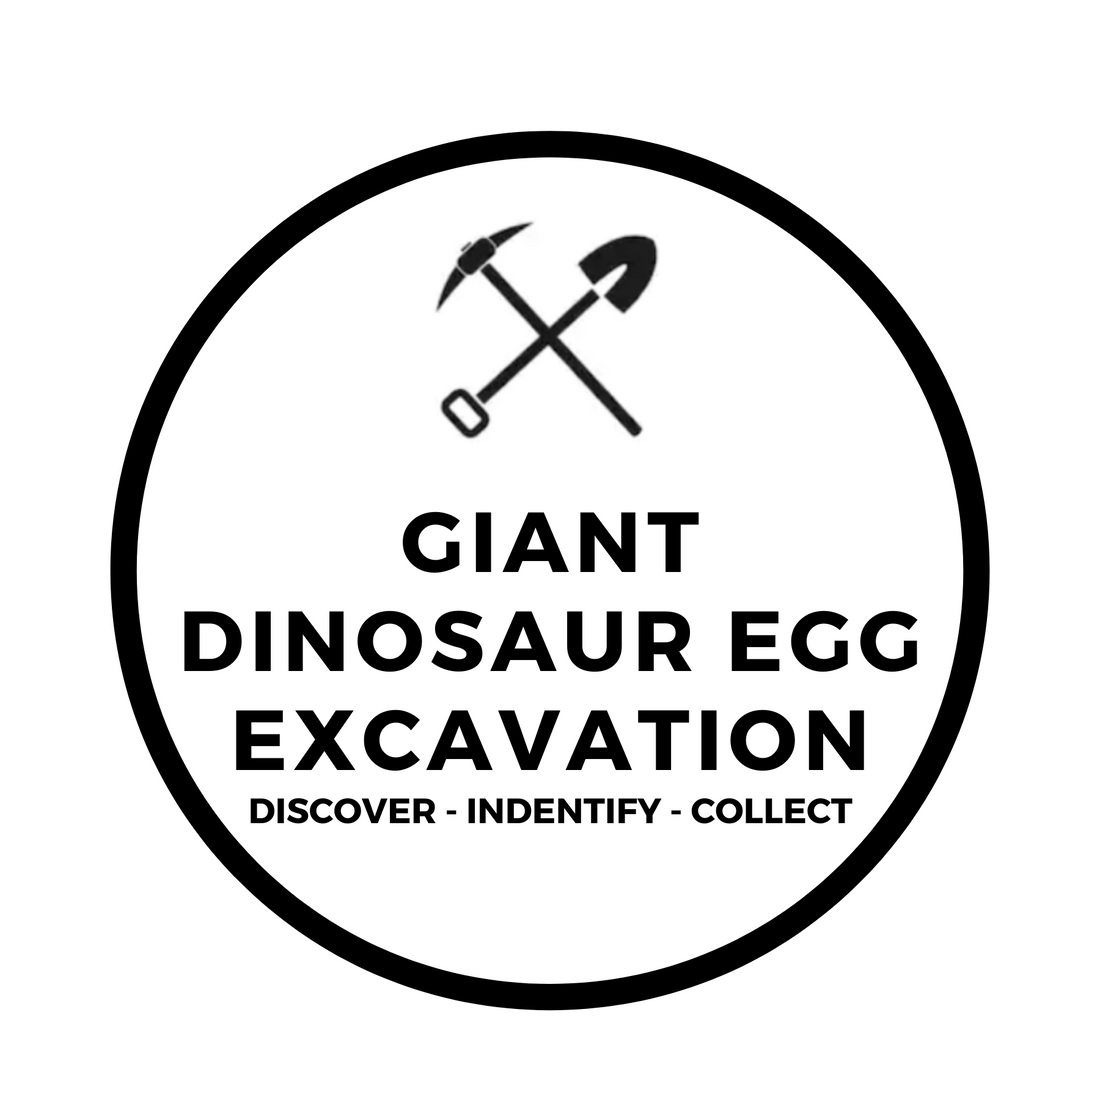 HOW TO MAKE A GIANT DINOSAUR EGG EXCAVATION